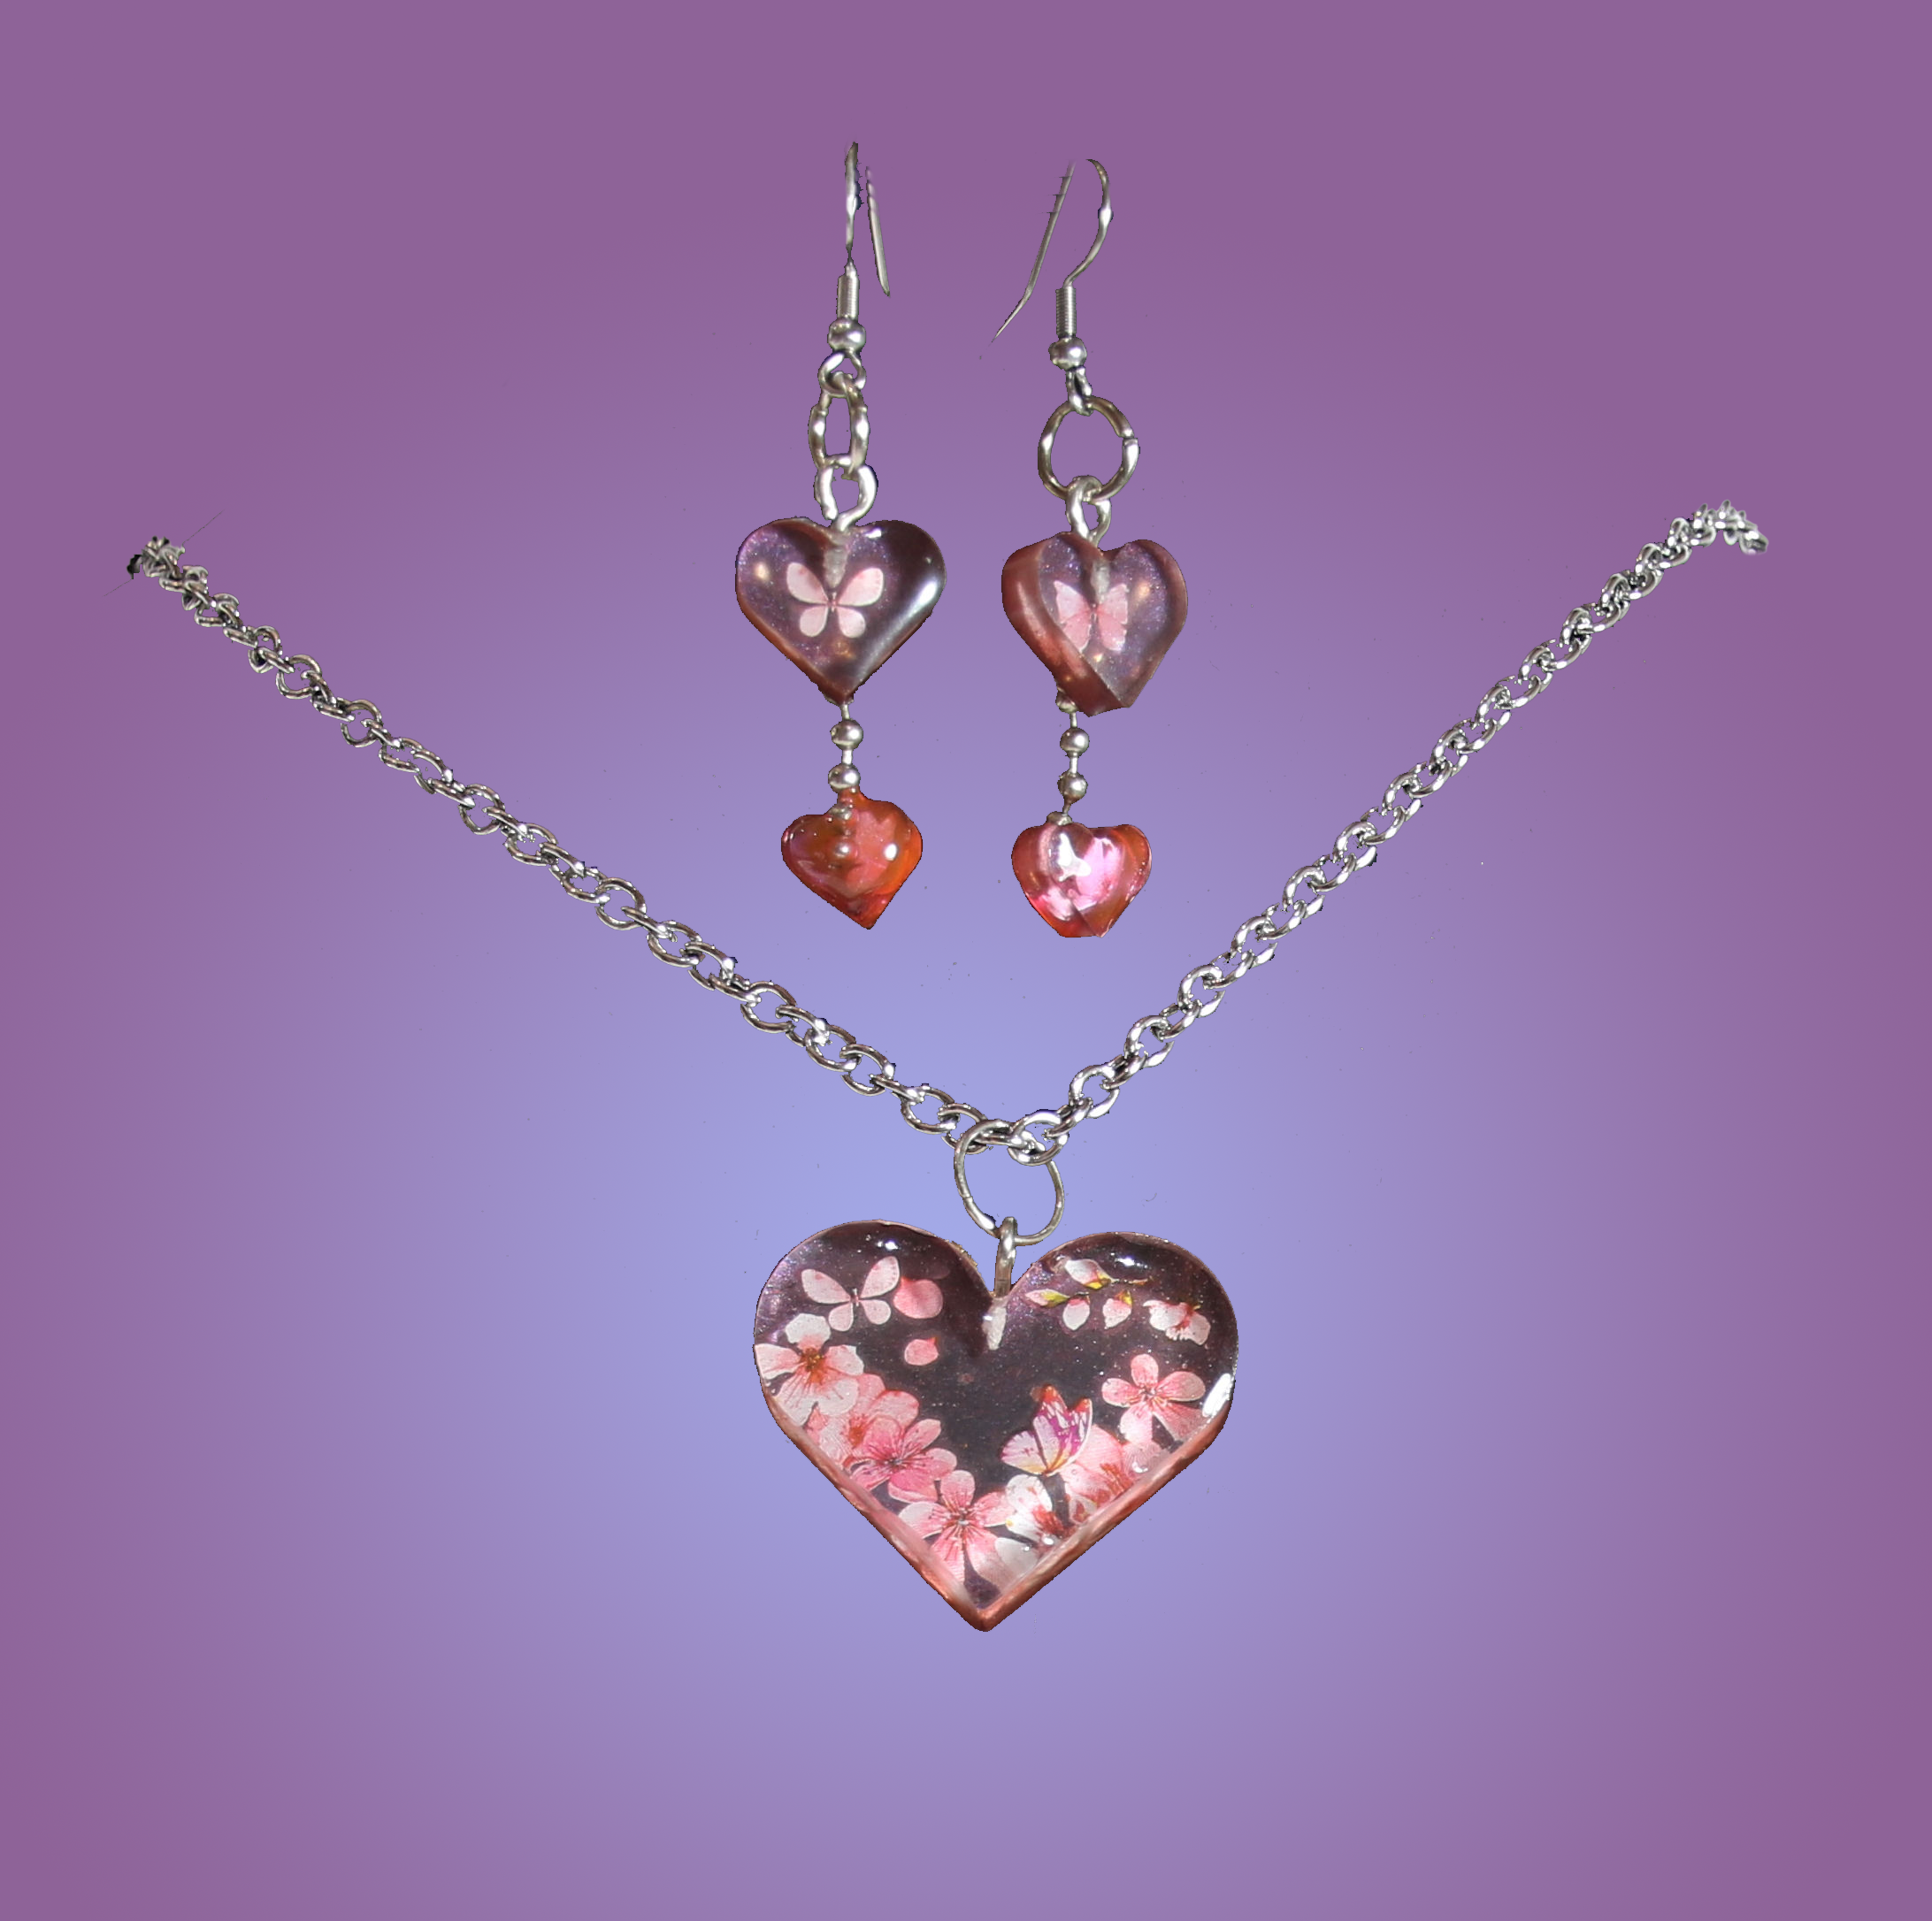 Clear Heart Shaped Pendant with Cherry Blossom Detail and Matching Earrings